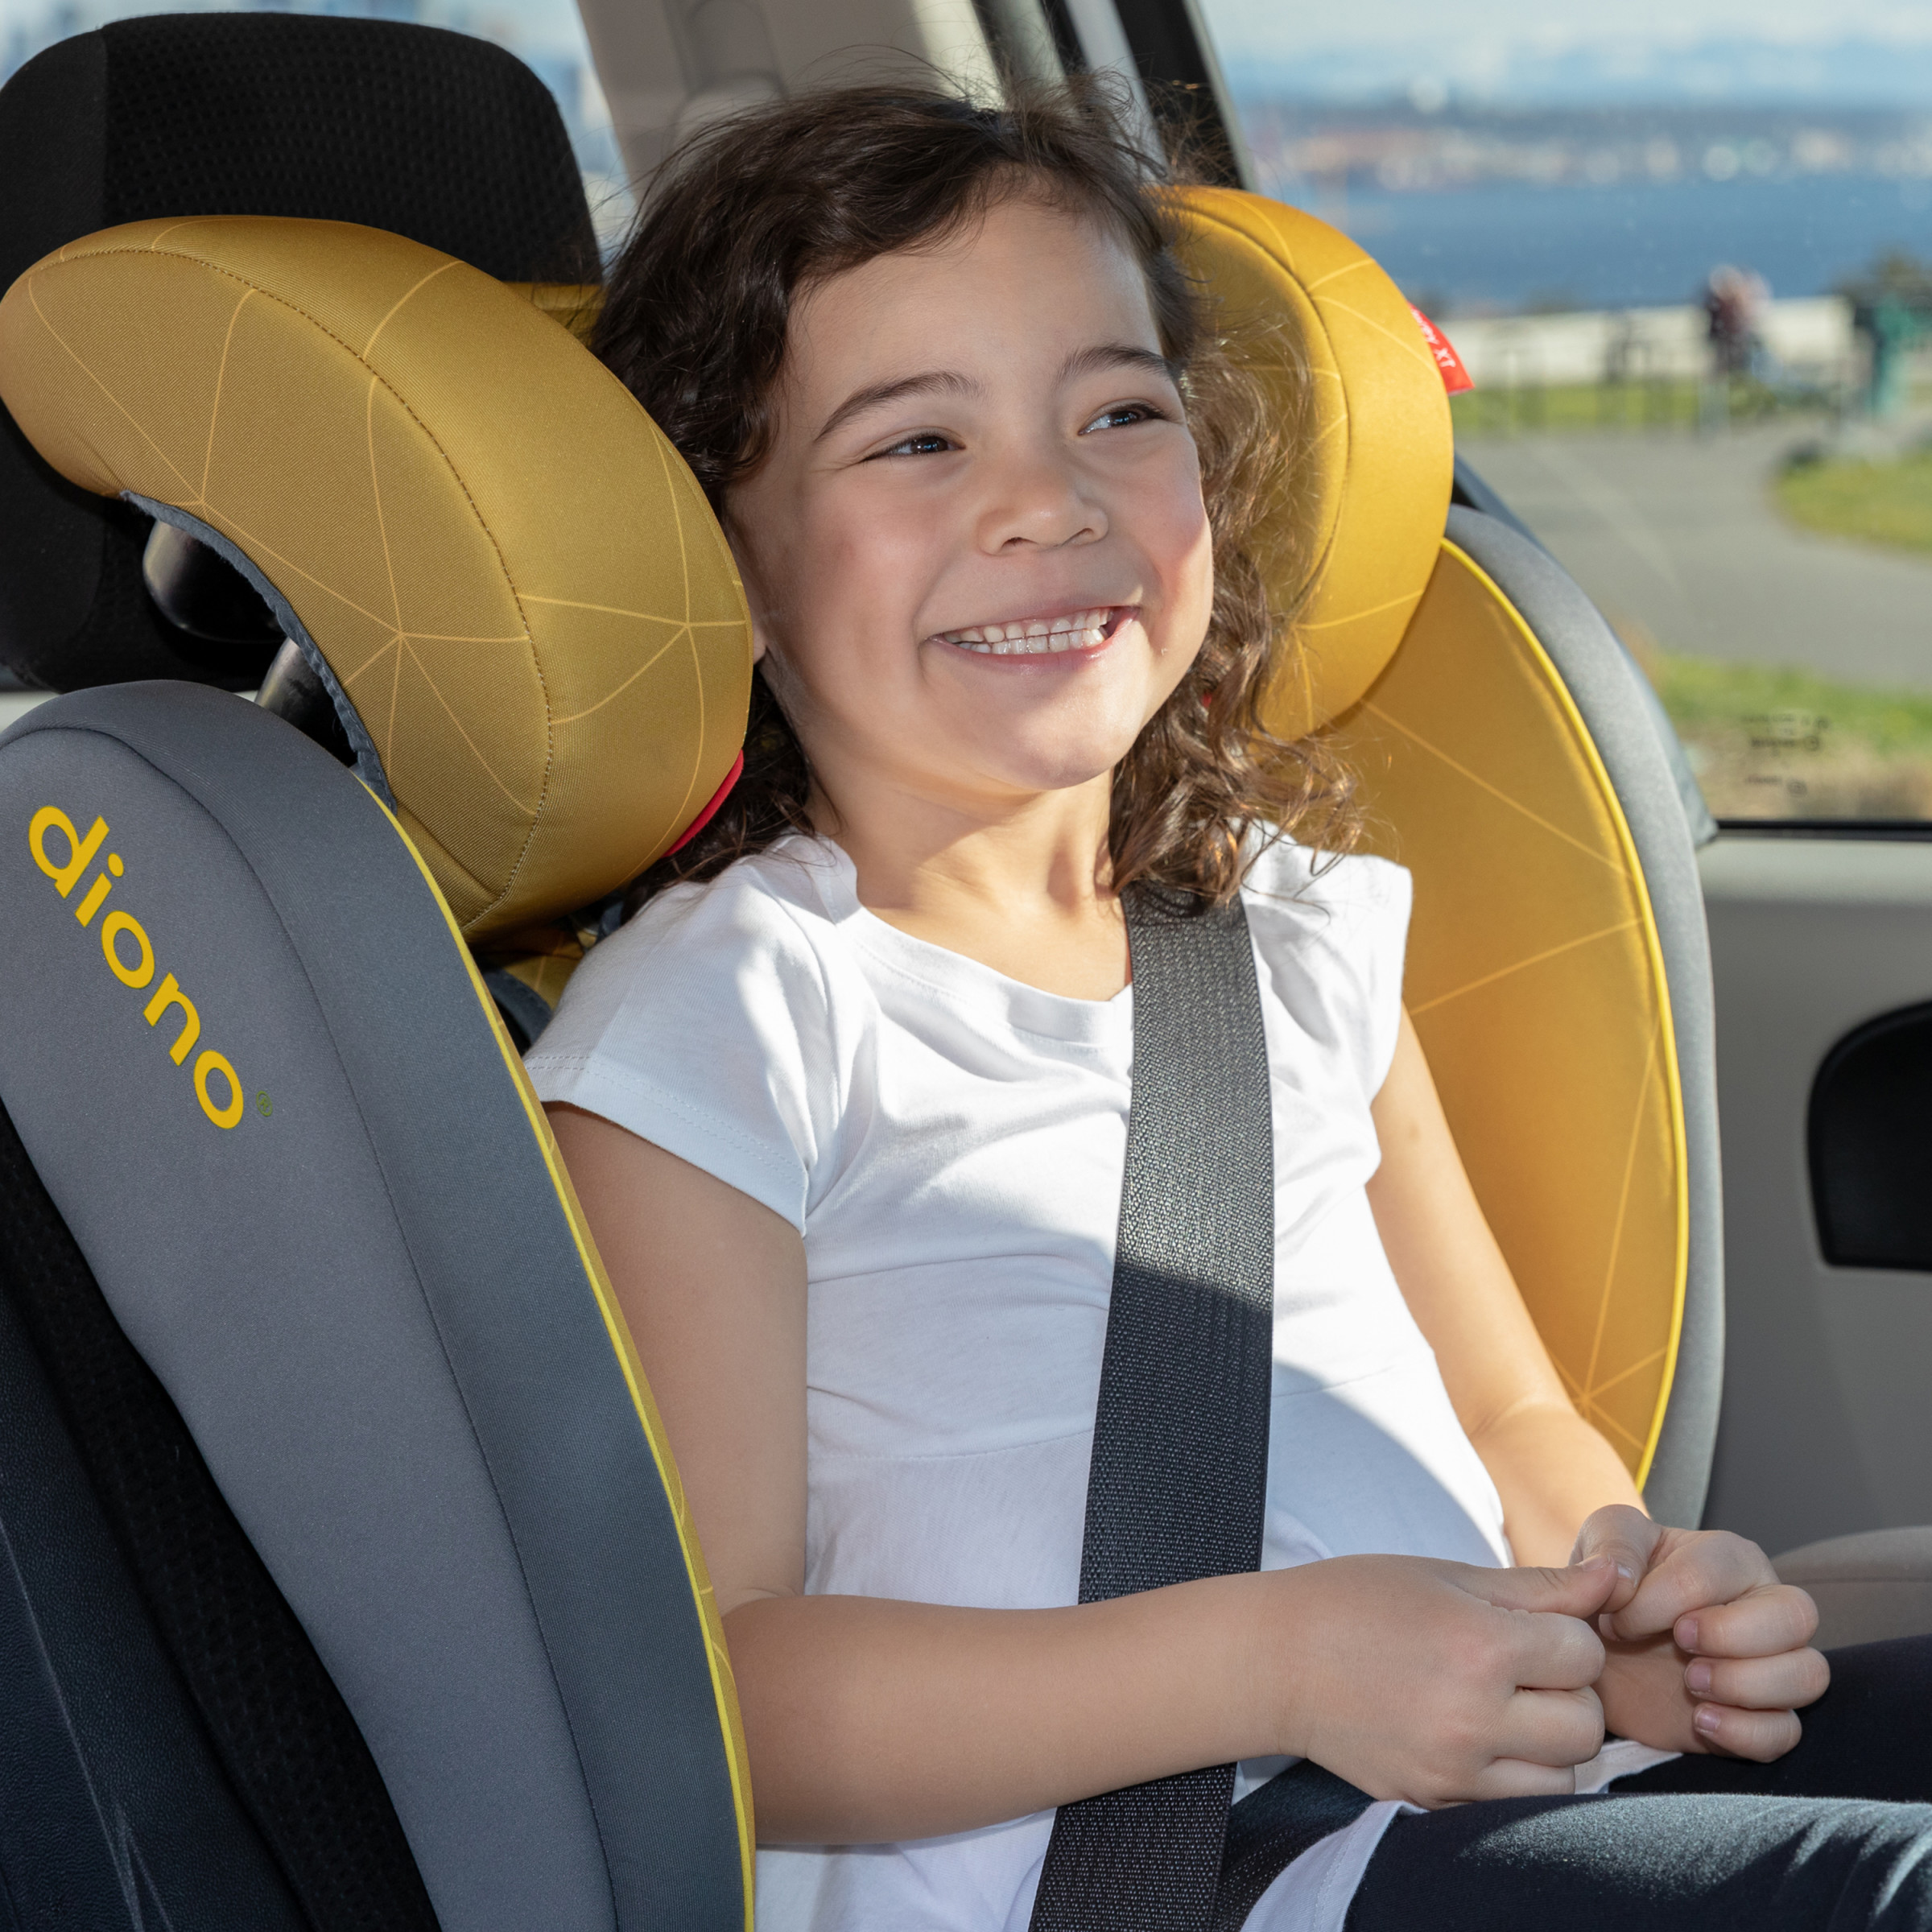 Diono Monterey XT Latch 2-in-1 Expandable Booster Car Seat, Gray Oyster - image 9 of 13